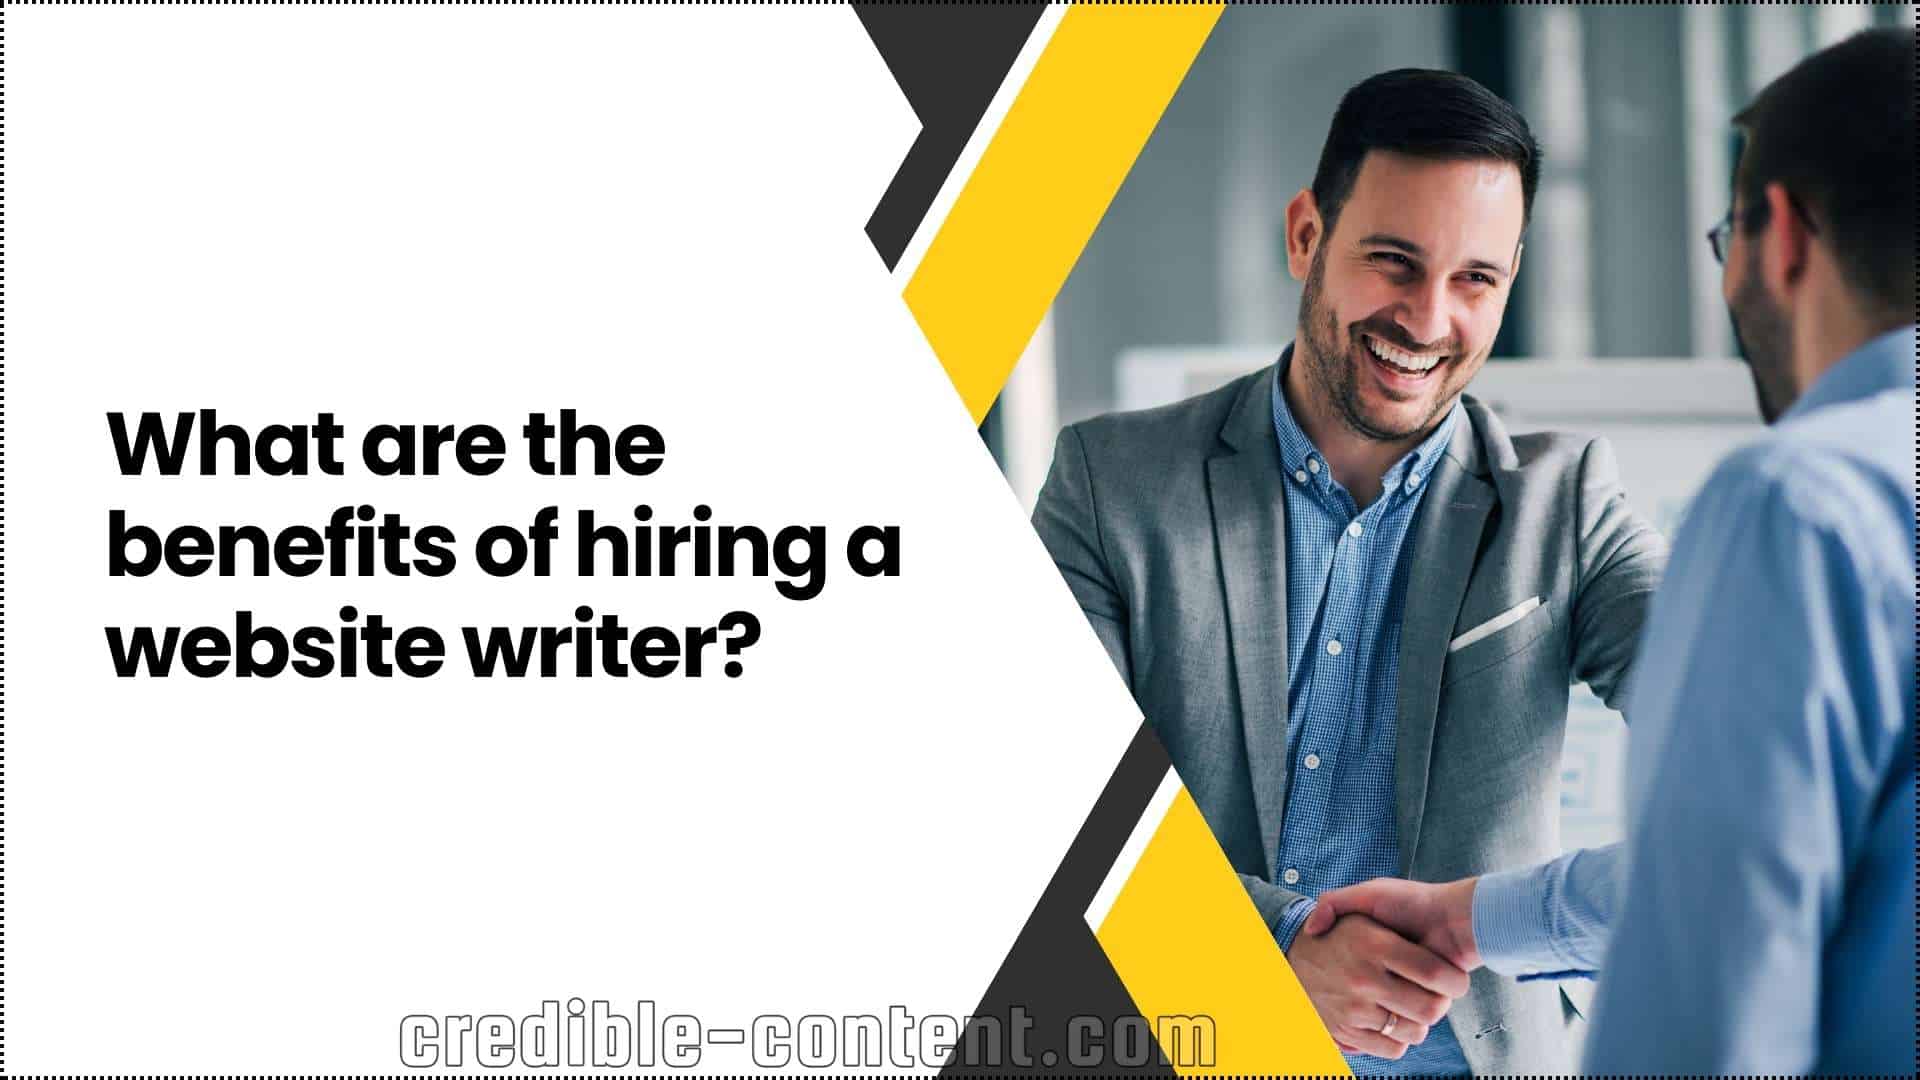 What are the benefits of hiring a website writer